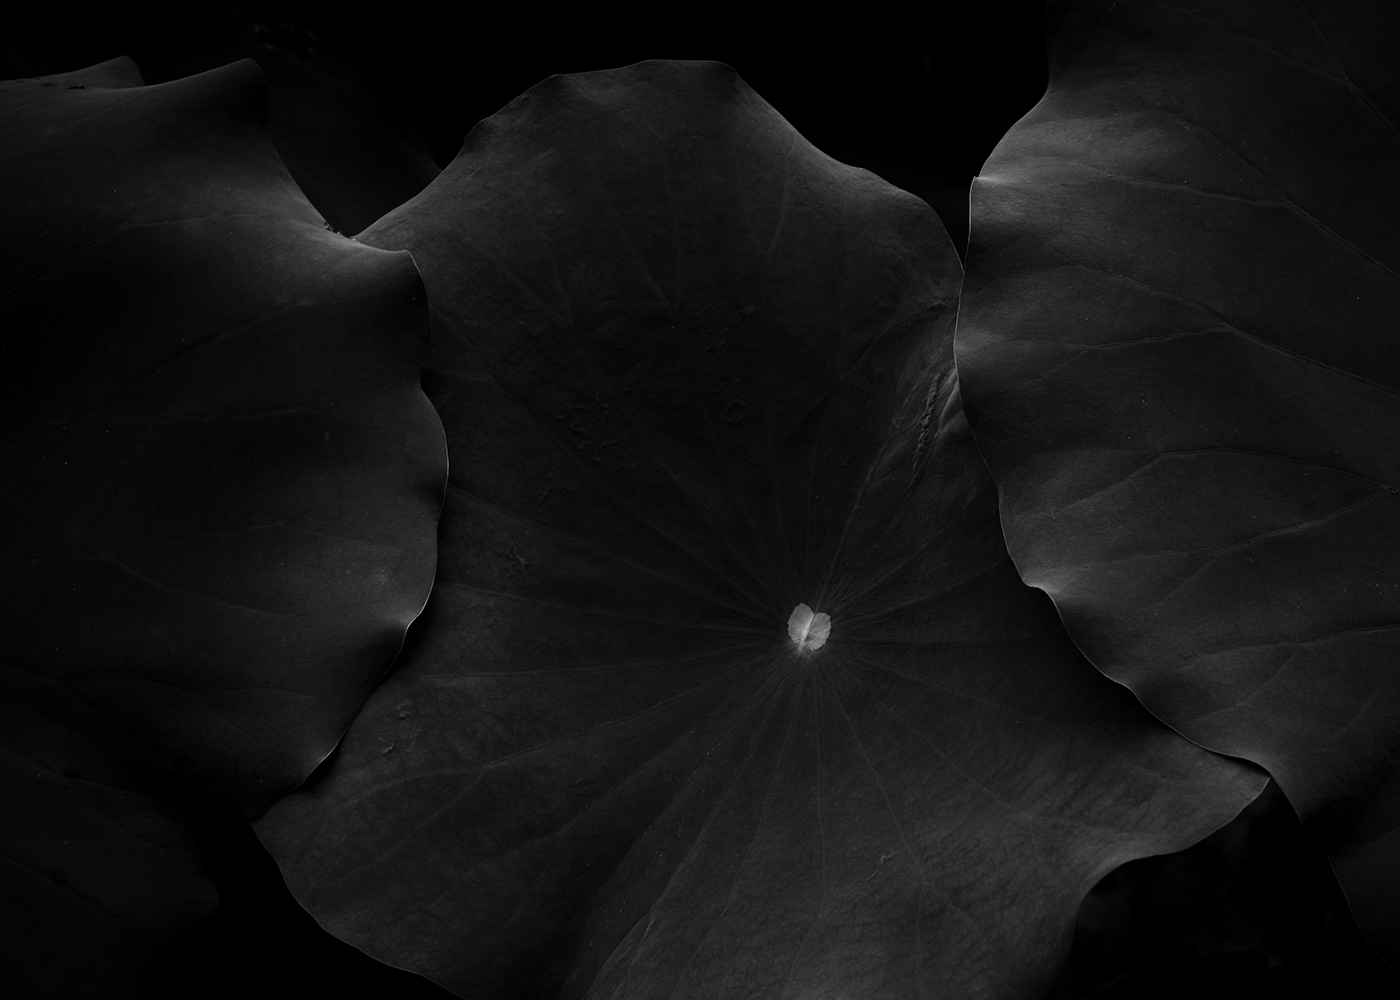 lotus flower Lotus Leaves Nature black and white abstract texture 荷花 荷叶